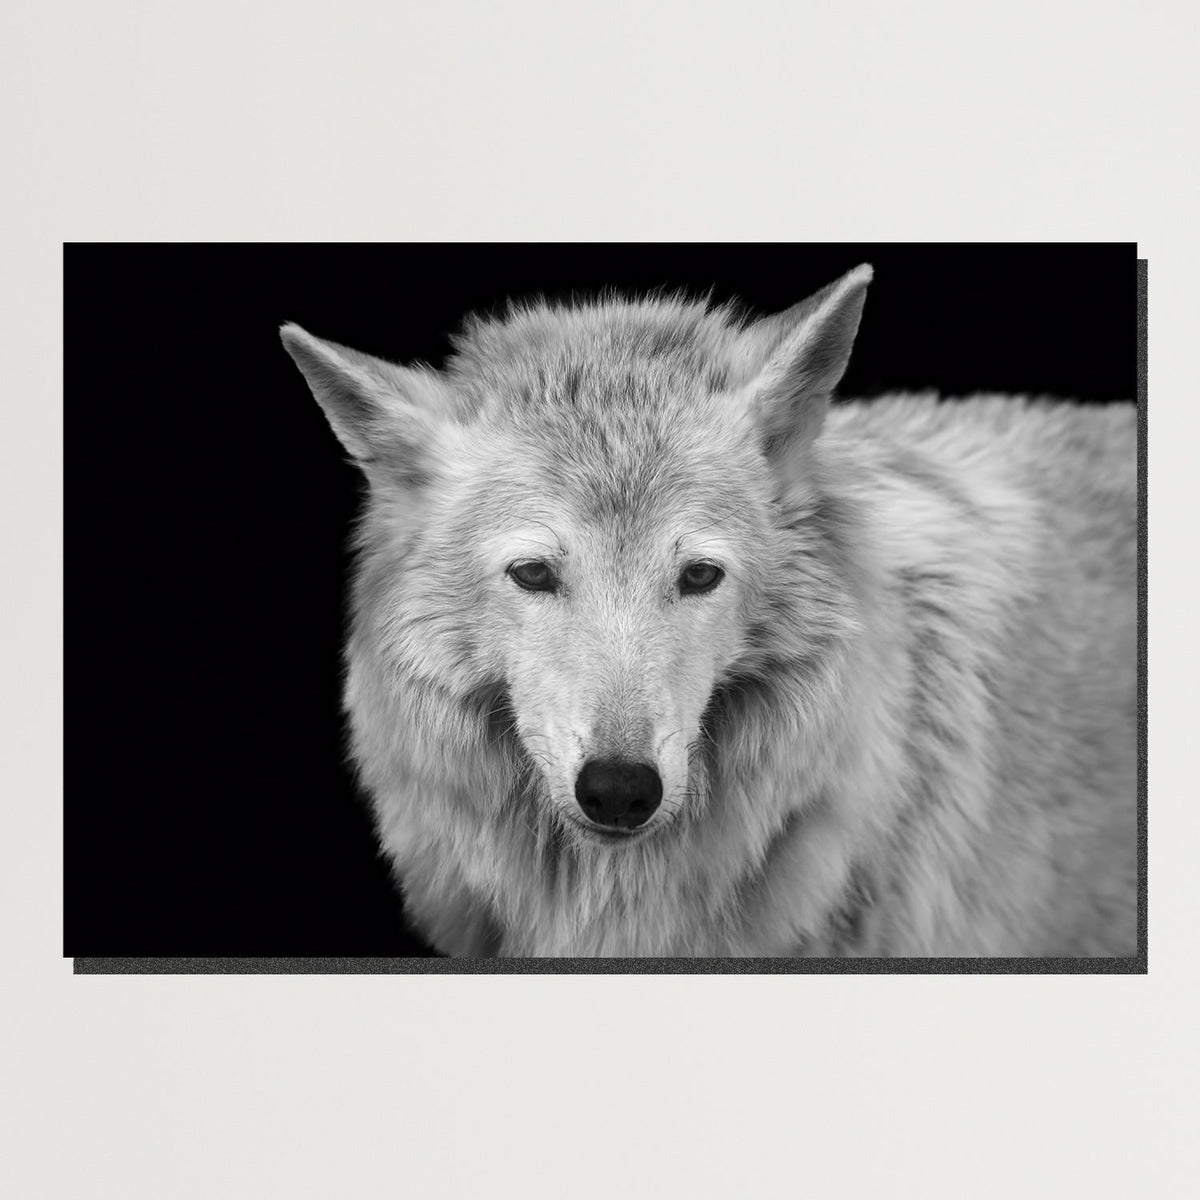 https://cdn.shopify.com/s/files/1/0387/9986/8044/products/WildForestWolfCanvasArtprintStretched-Plain.jpg